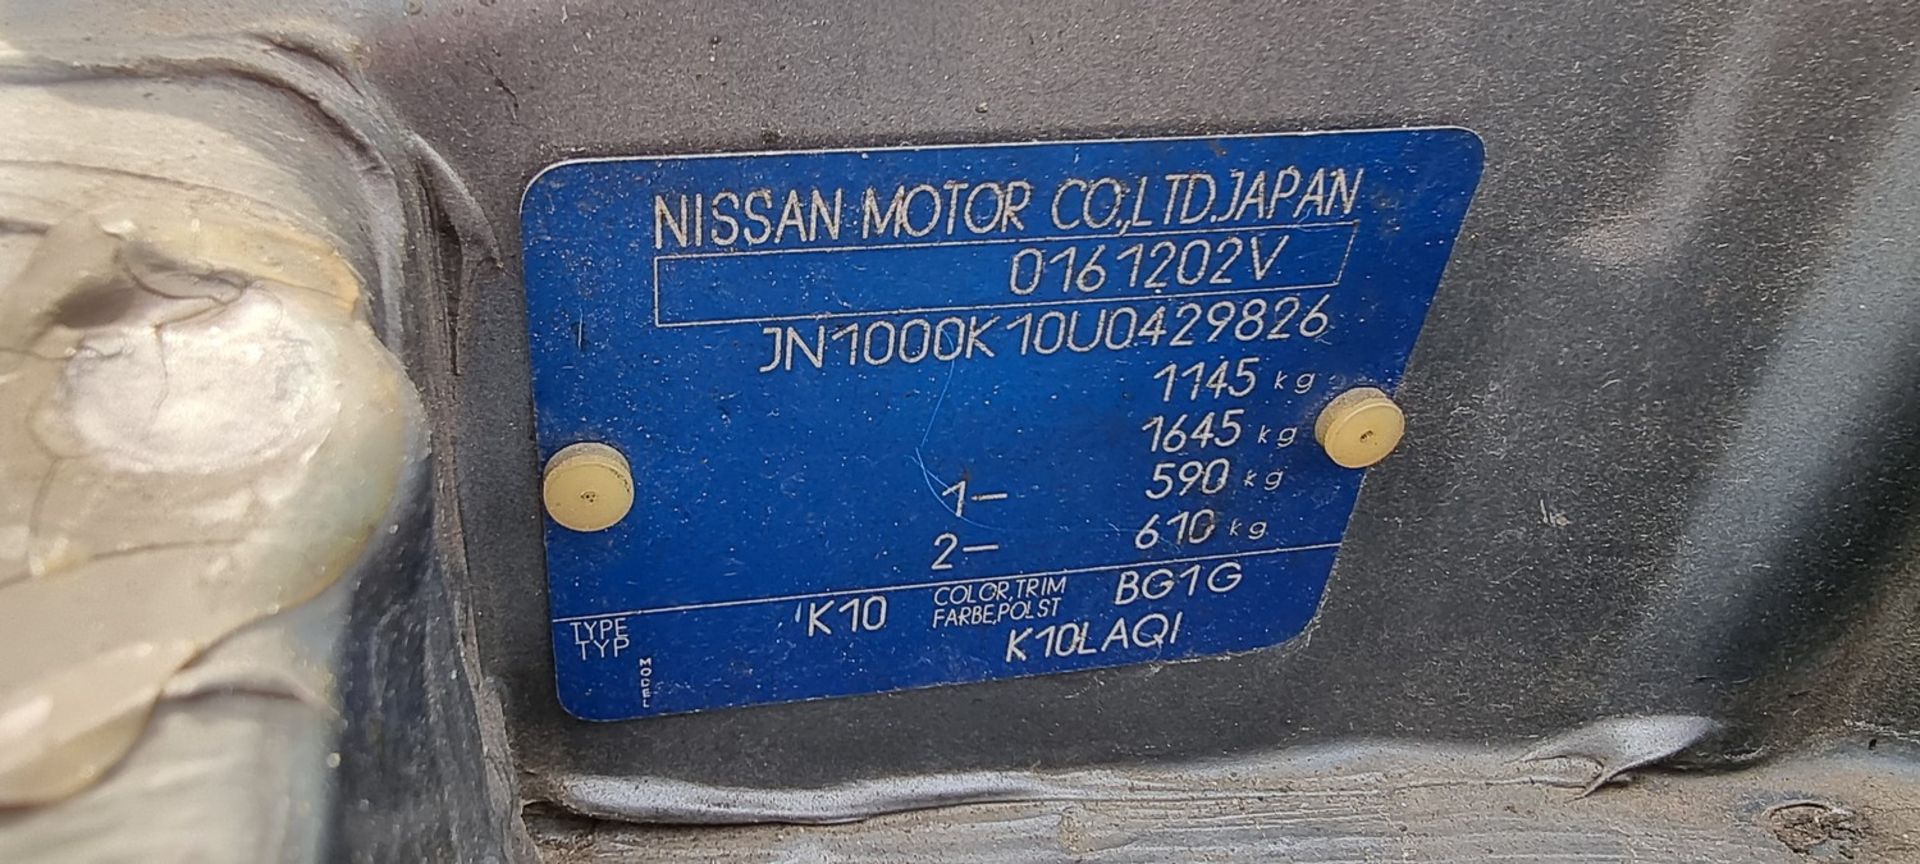 1987 Nissan Micra SGL automatic, 998cc. Registration number E549 BPU. Chassis number K10 429826. - Image 13 of 15